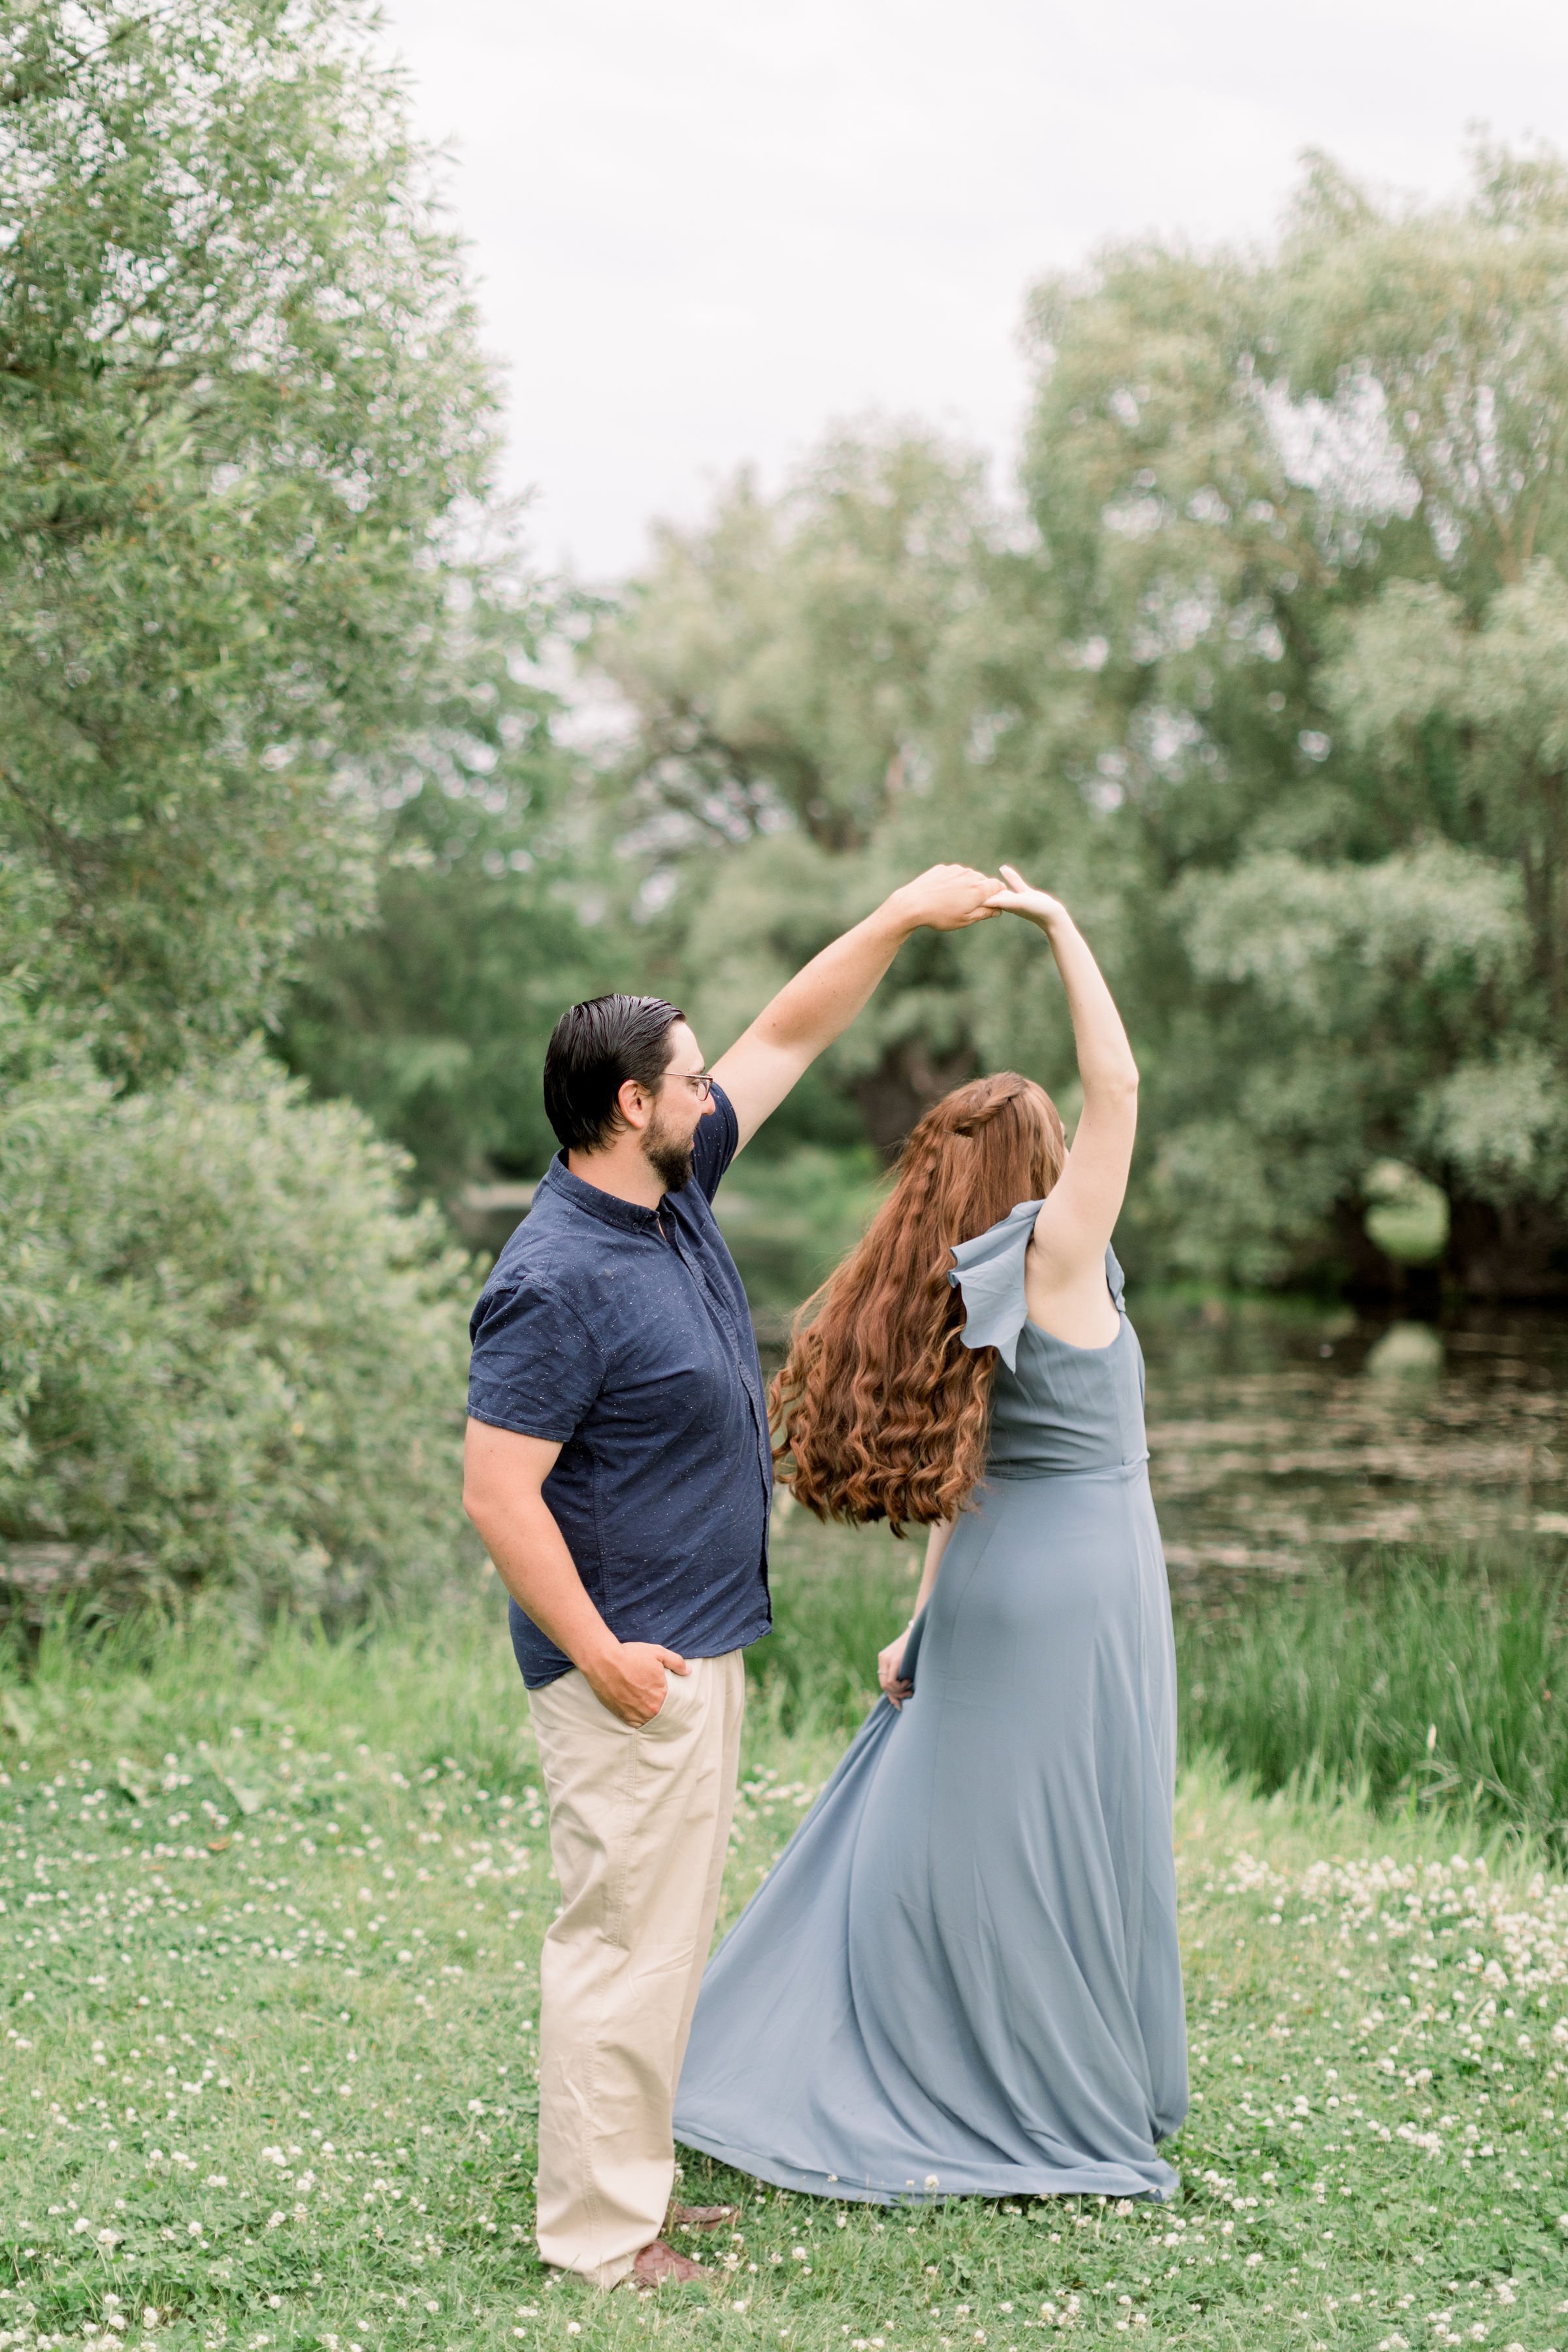  Chelsea Mason Photography captures an engaged couple dancing in a grass field at Dominion Arboretum. dancing couple in field twirling #chelseamasonphotography #chelseamasonengagements #Ottawaengagements #DominonArboretum #OttawaPhotographers&nbsp; 